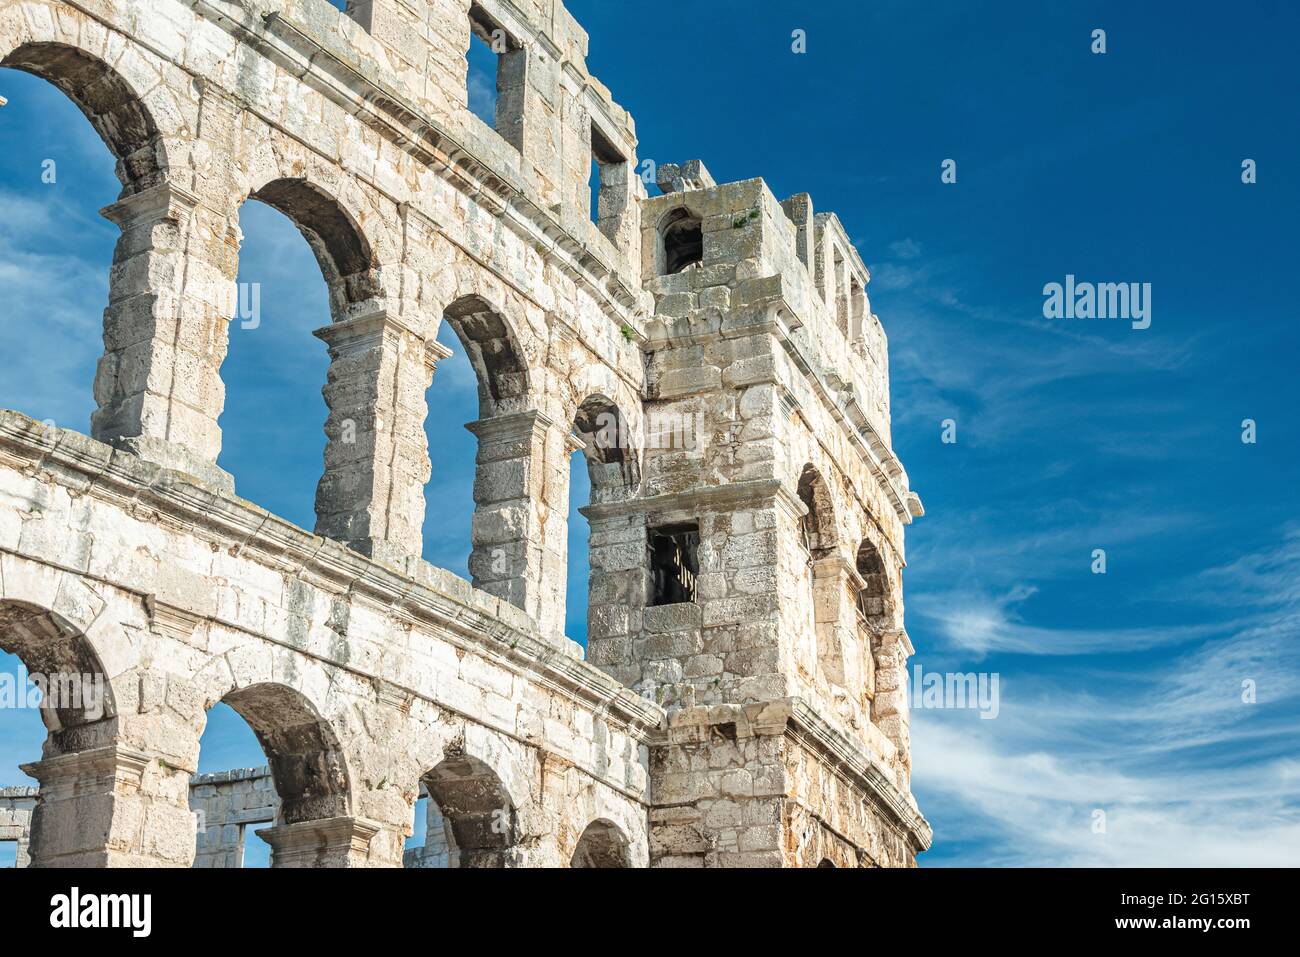 Amphitheater in Pula Croatia .The three-story amphitheater is the sixth largest in the world and has well preserved outer walls. Stock Photo